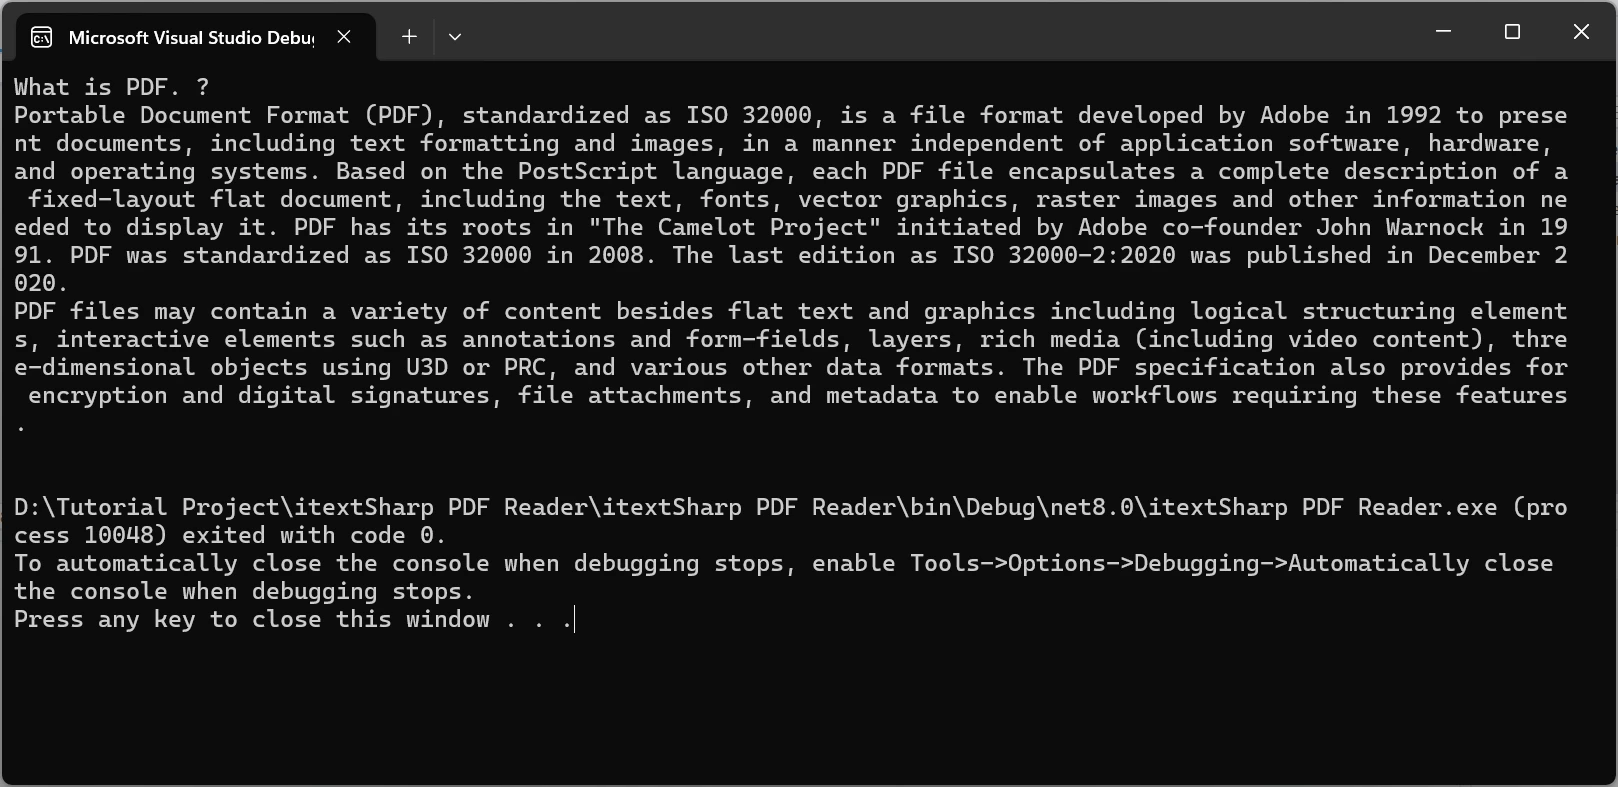 How to Read PDF Documents in C# using iTextSharp:: Figure 6 - Console Output: Using IronPDF to extract the text from the PDF document "What_is_pdf.pdf" and display it as plain text in the console.